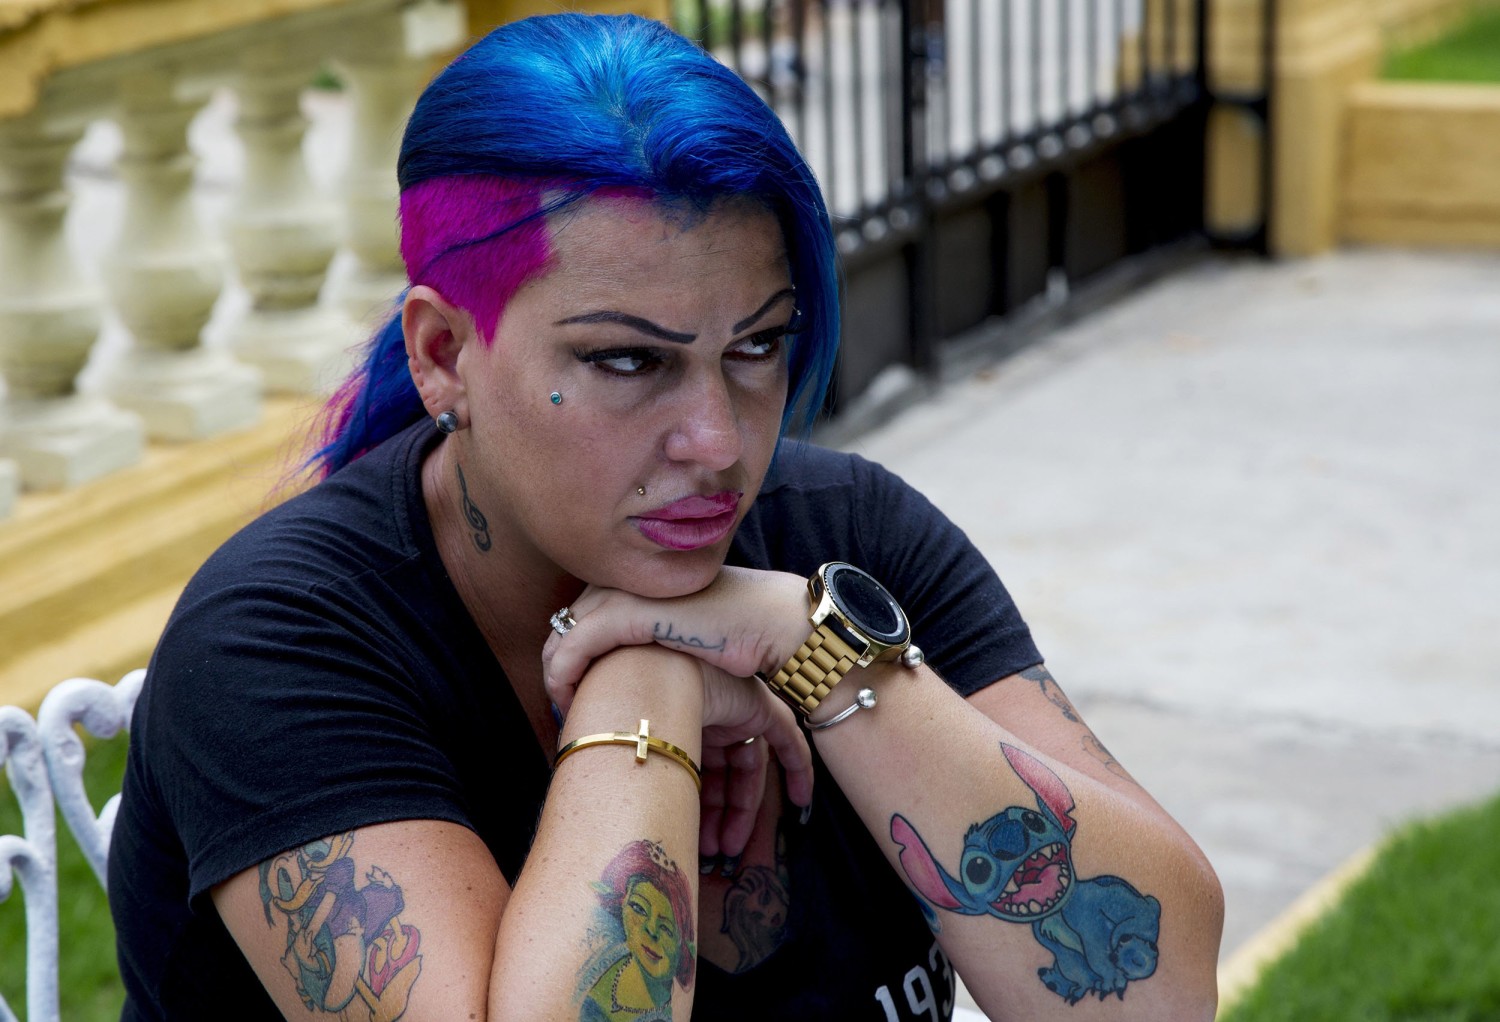 Young Cubans and tattoos: fashion or generational mark? - IPS Cuba